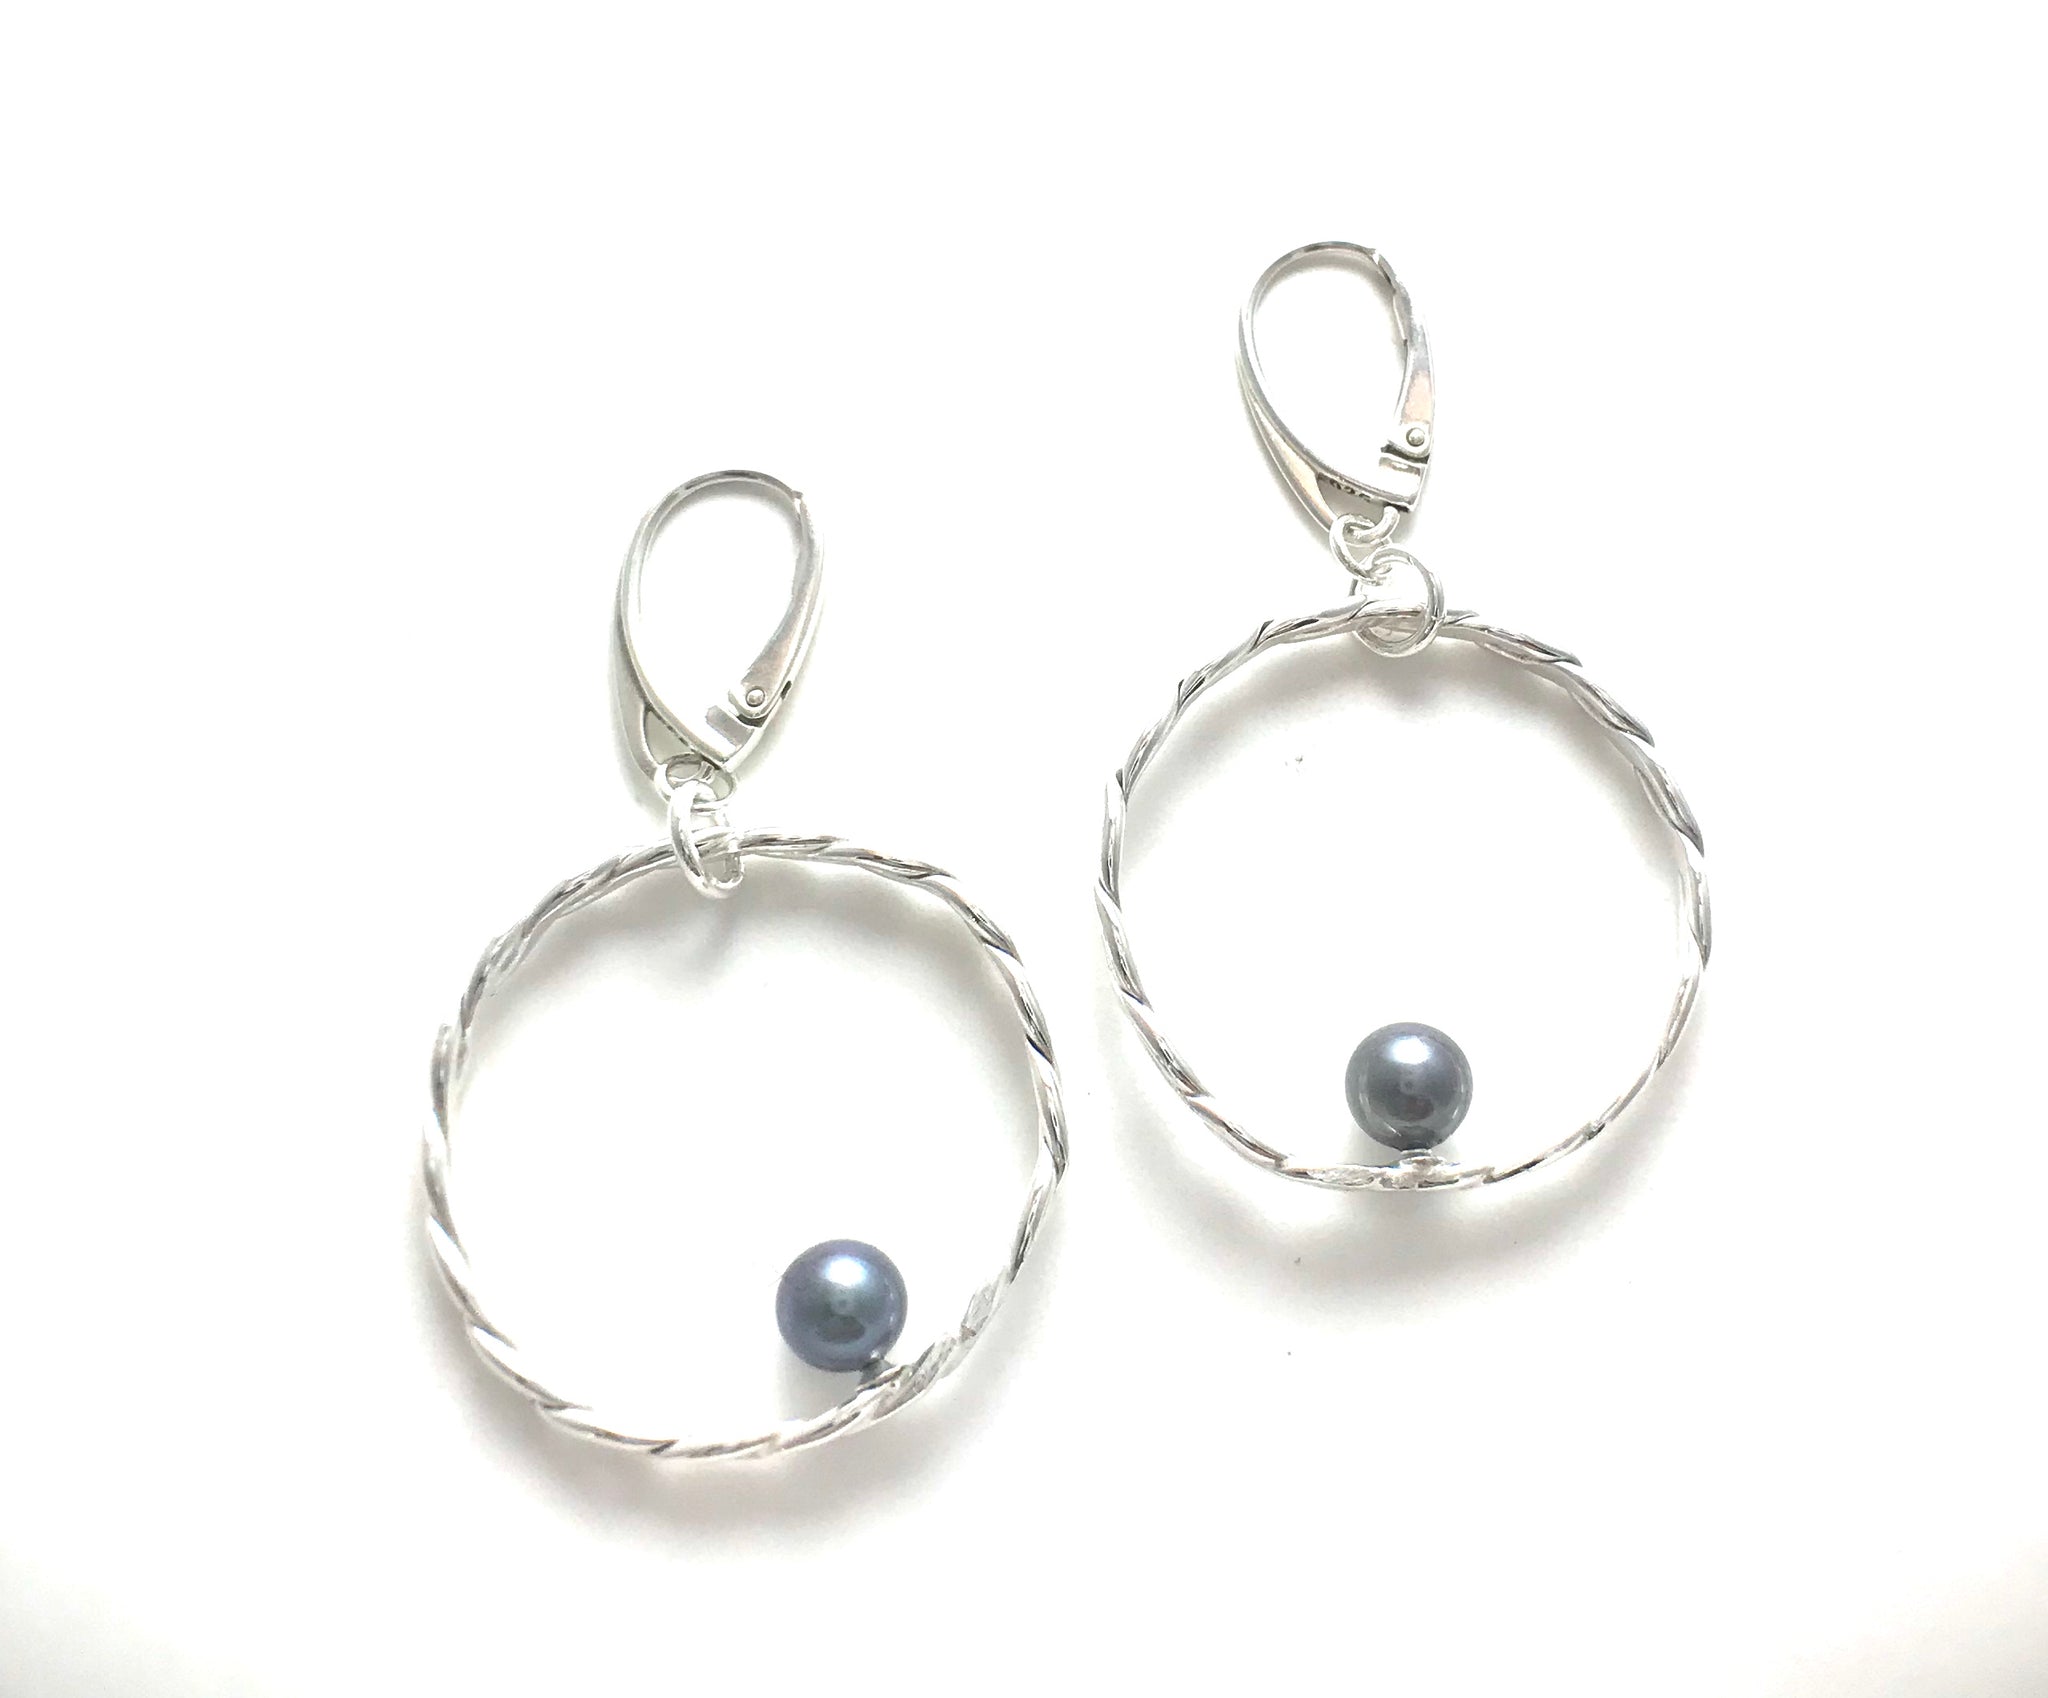 Braided silver with silky gray pearl accents.   These earrings hang on Leverbacks.